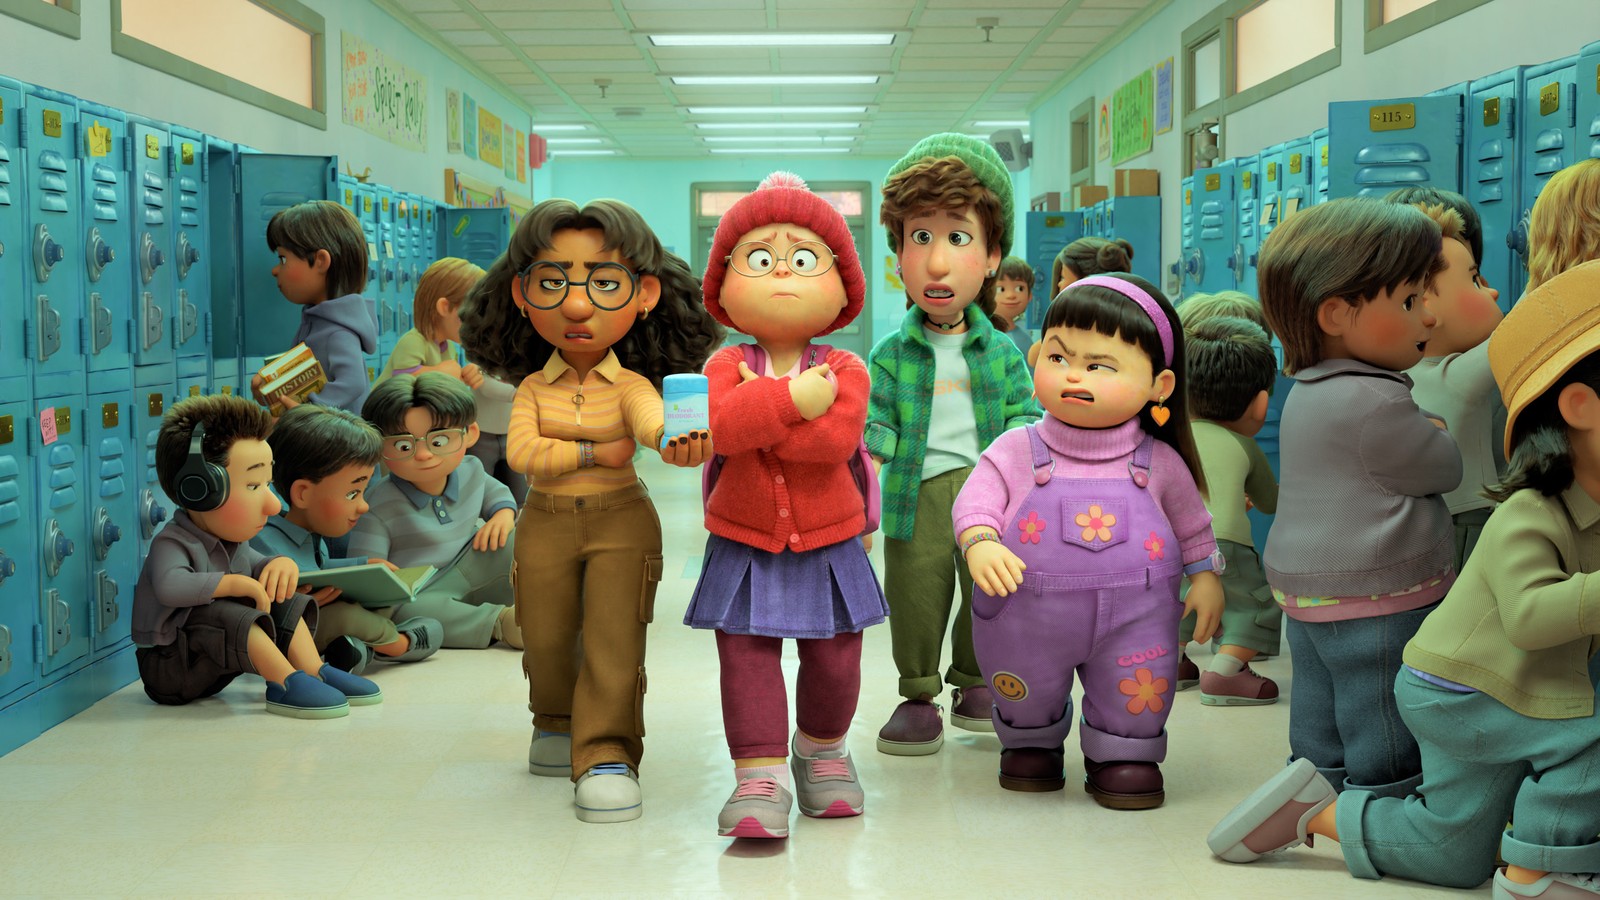 Pixar's 'Turning Red' Has the Cleverest Take on Puberty - The Atlantic